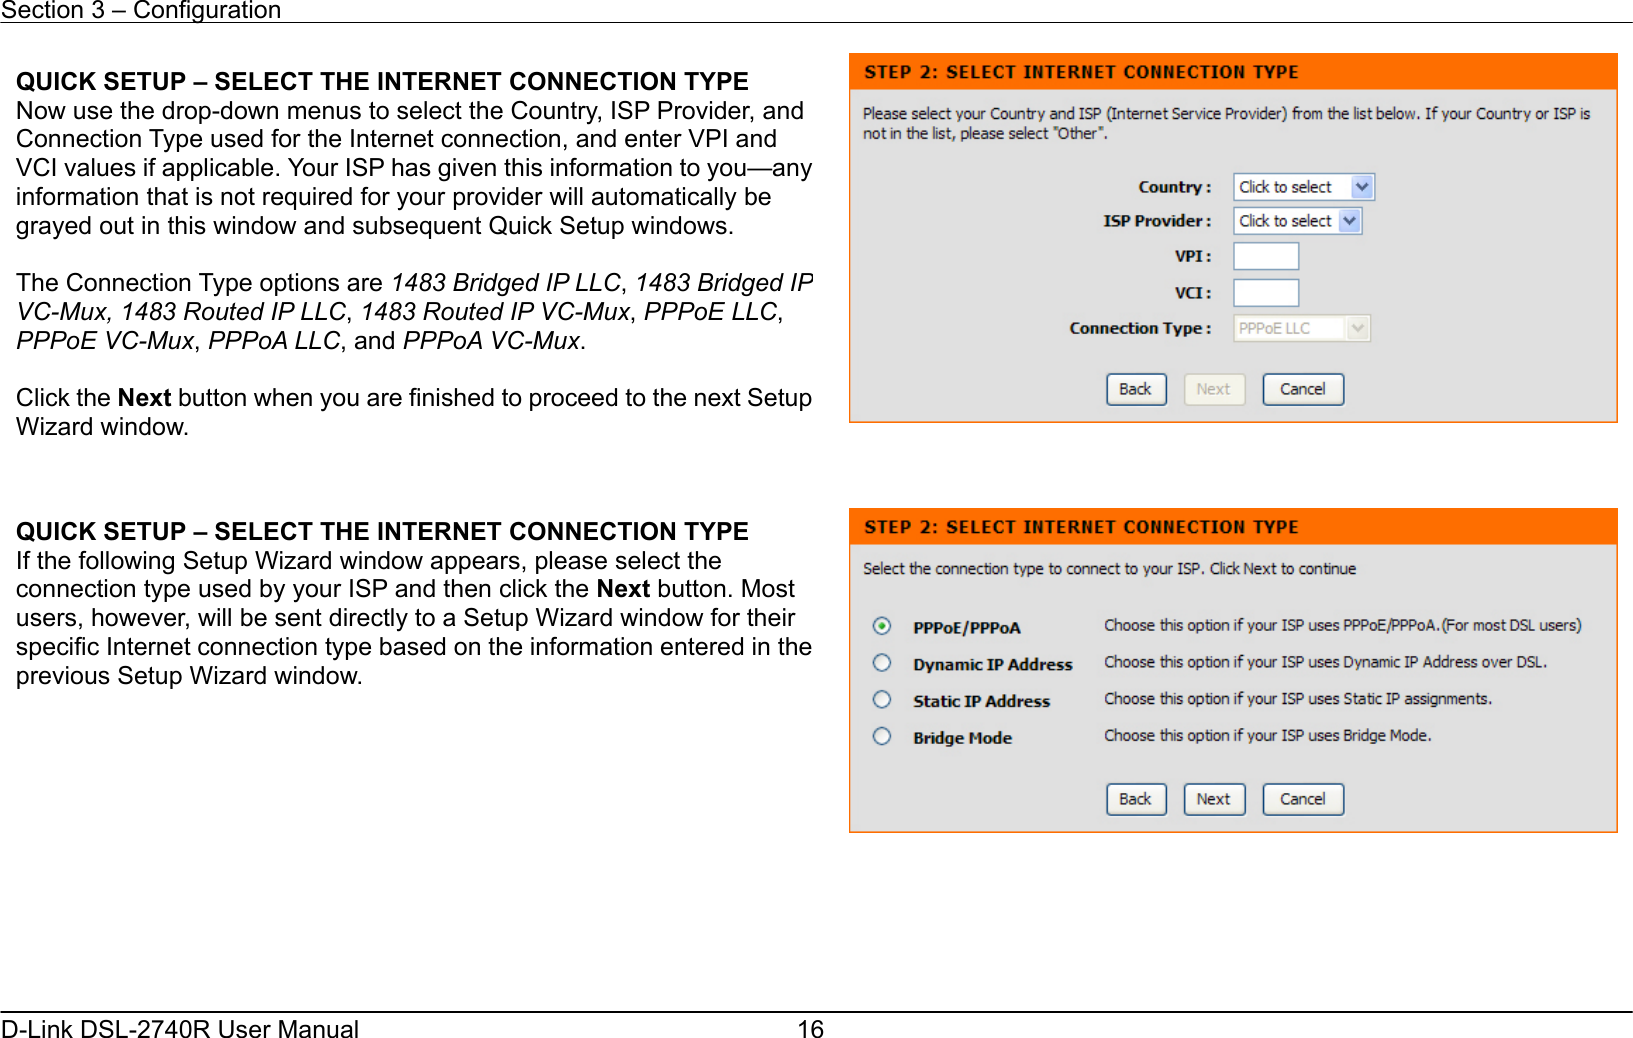 Section 3 – Configuration   D-Link DSL-2740R User Manual  16            QUICK SETUP – SELECT THE INTERNET CONNECTION TYPE Now use the drop-down menus to select the Country, ISP Provider, and Connection Type used for the Internet connection, and enter VPI and VCI values if applicable. Your ISP has given this information to you—any information that is not required for your provider will automatically be grayed out in this window and subsequent Quick Setup windows.    The Connection Type options are 1483 Bridged IP LLC, 1483 Bridged IP VC-Mux, 1483 Routed IP LLC, 1483 Routed IP VC-Mux, PPPoE LLC, PPPoE VC-Mux, PPPoA LLC, and PPPoA VC-Mux.  Click the Next button when you are finished to proceed to the next SetupWizard window. QUICK SETUP – SELECT THE INTERNET CONNECTION TYPE If the following Setup Wizard window appears, please select the connection type used by your ISP and then click the Next button. Most users, however, will be sent directly to a Setup Wizard window for their specific Internet connection type based on the information entered in theprevious Setup Wizard window.  